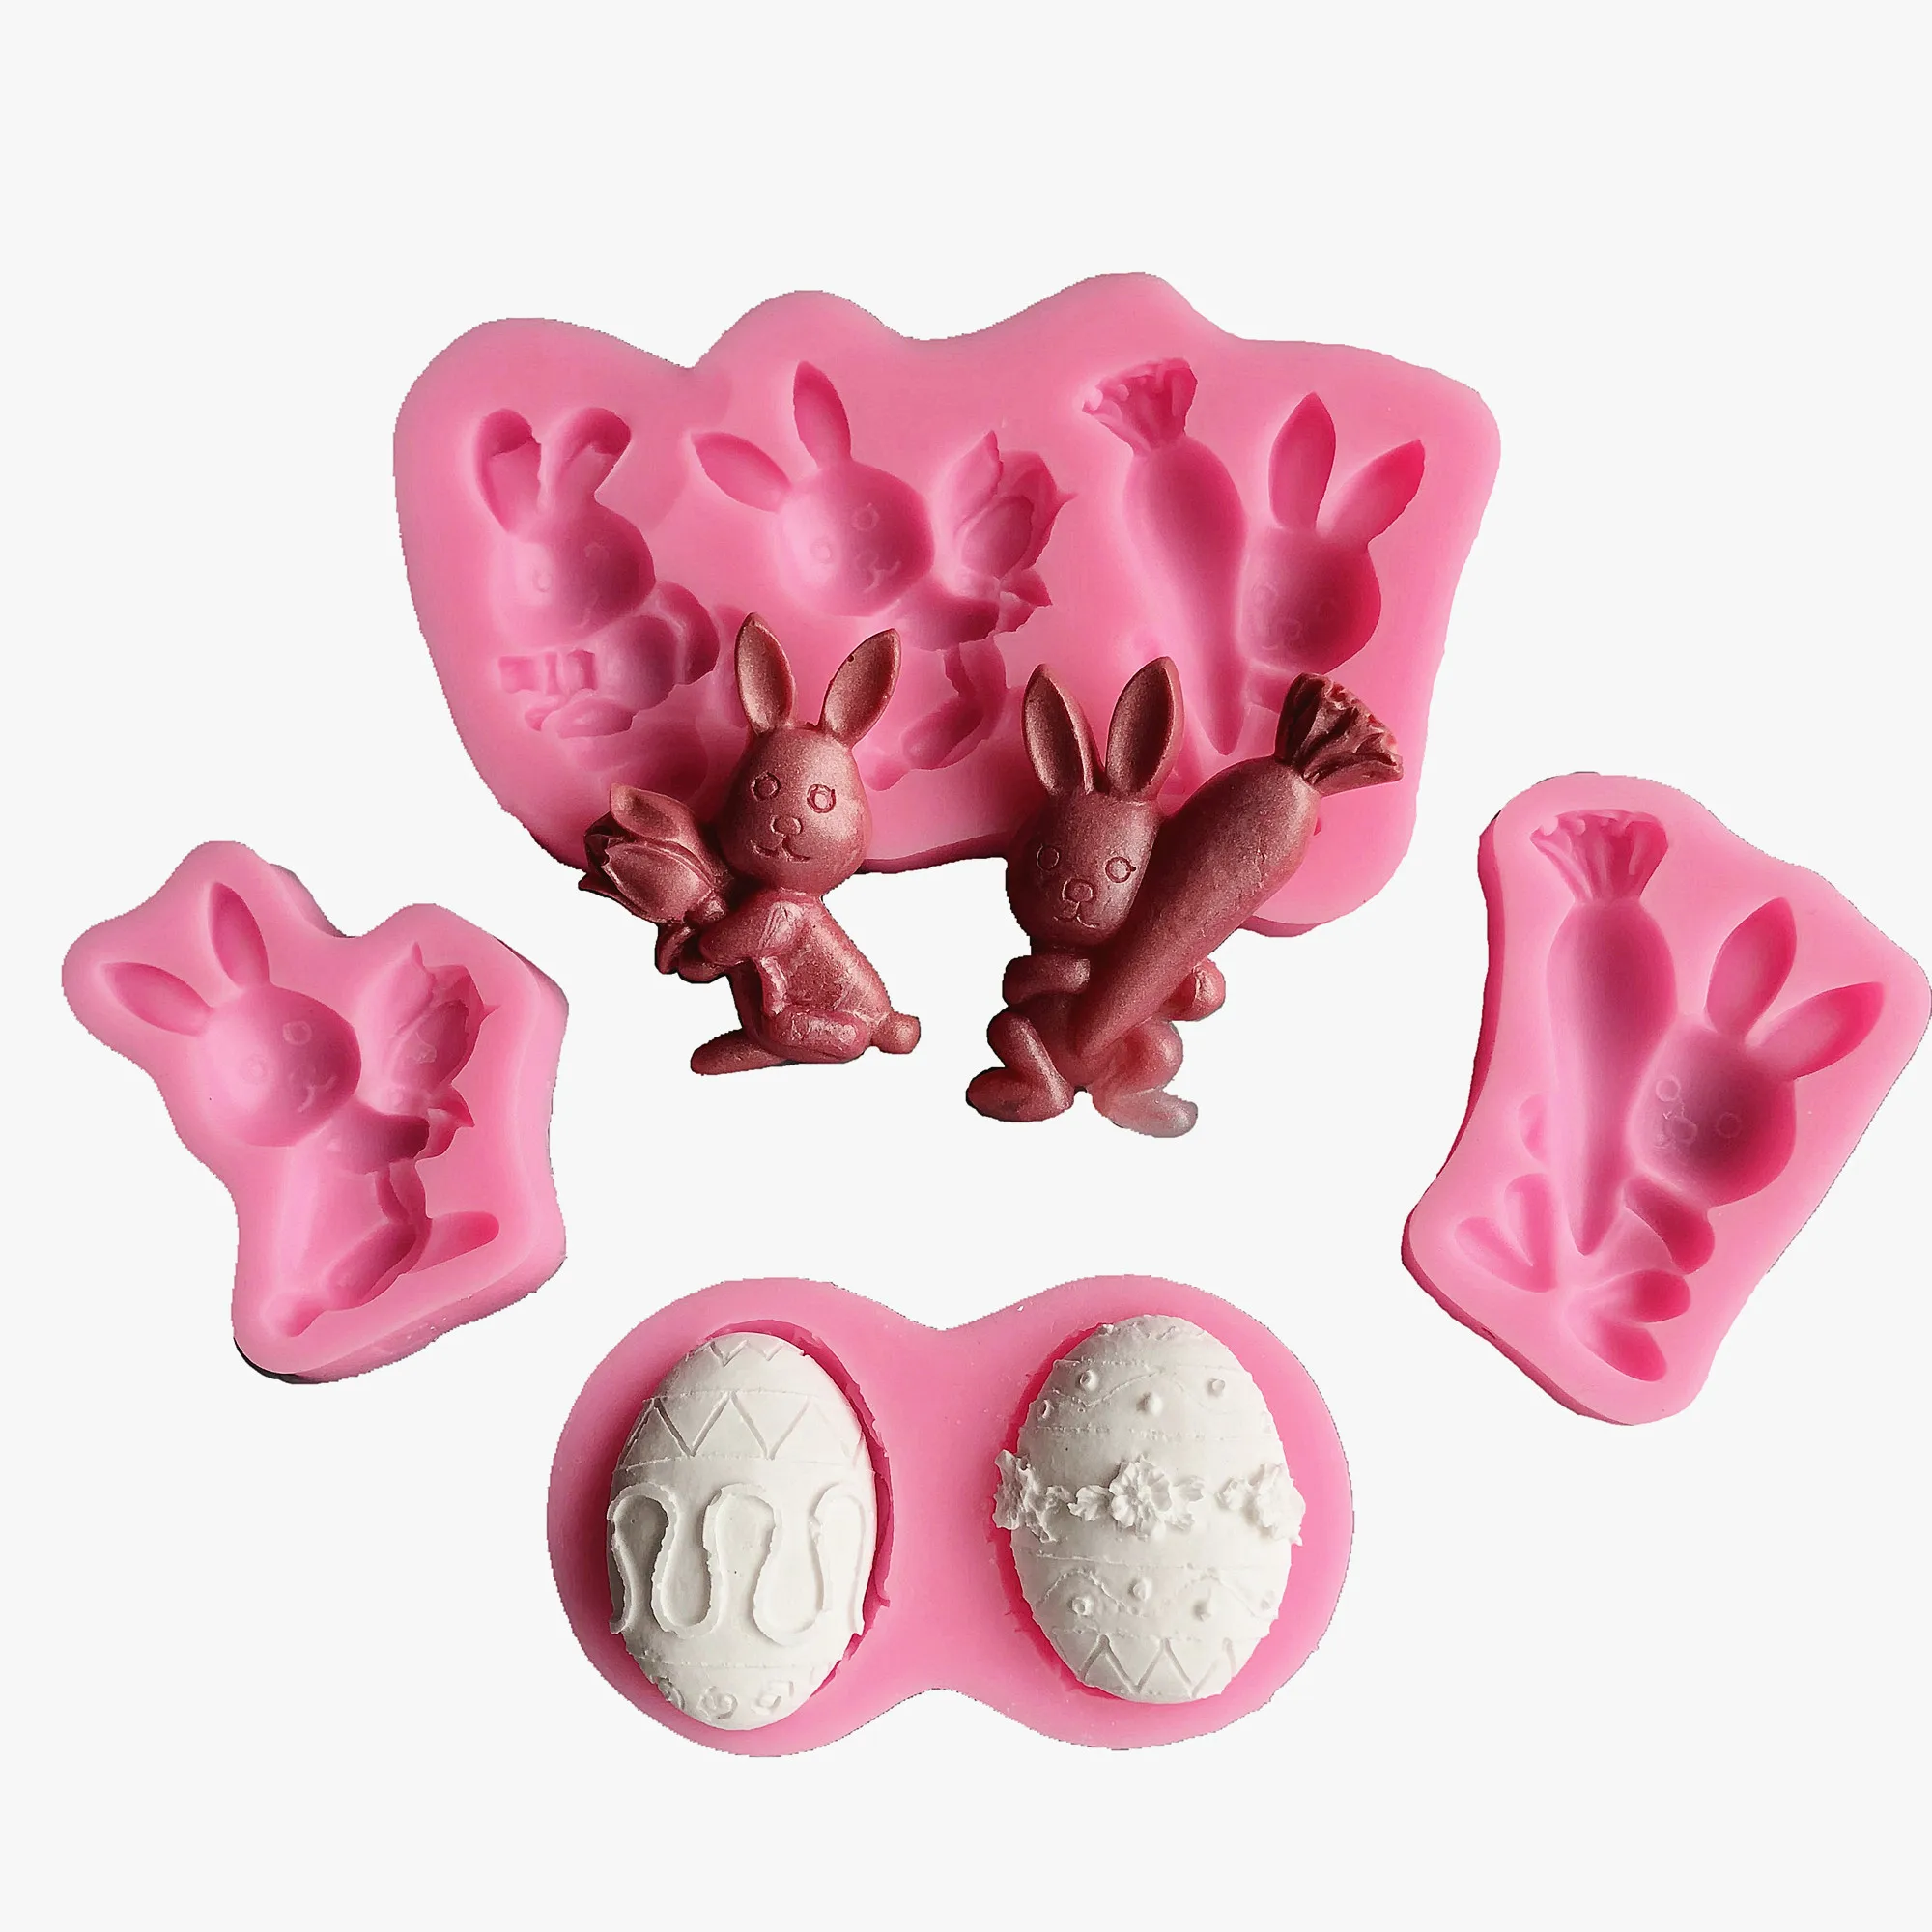 

Rabbit, Easter Cookie Mould Silicone Mold Fondant Cake Decorating Tool Gumpaste Sugarcraft Chocolate Forms Bakeware Tools